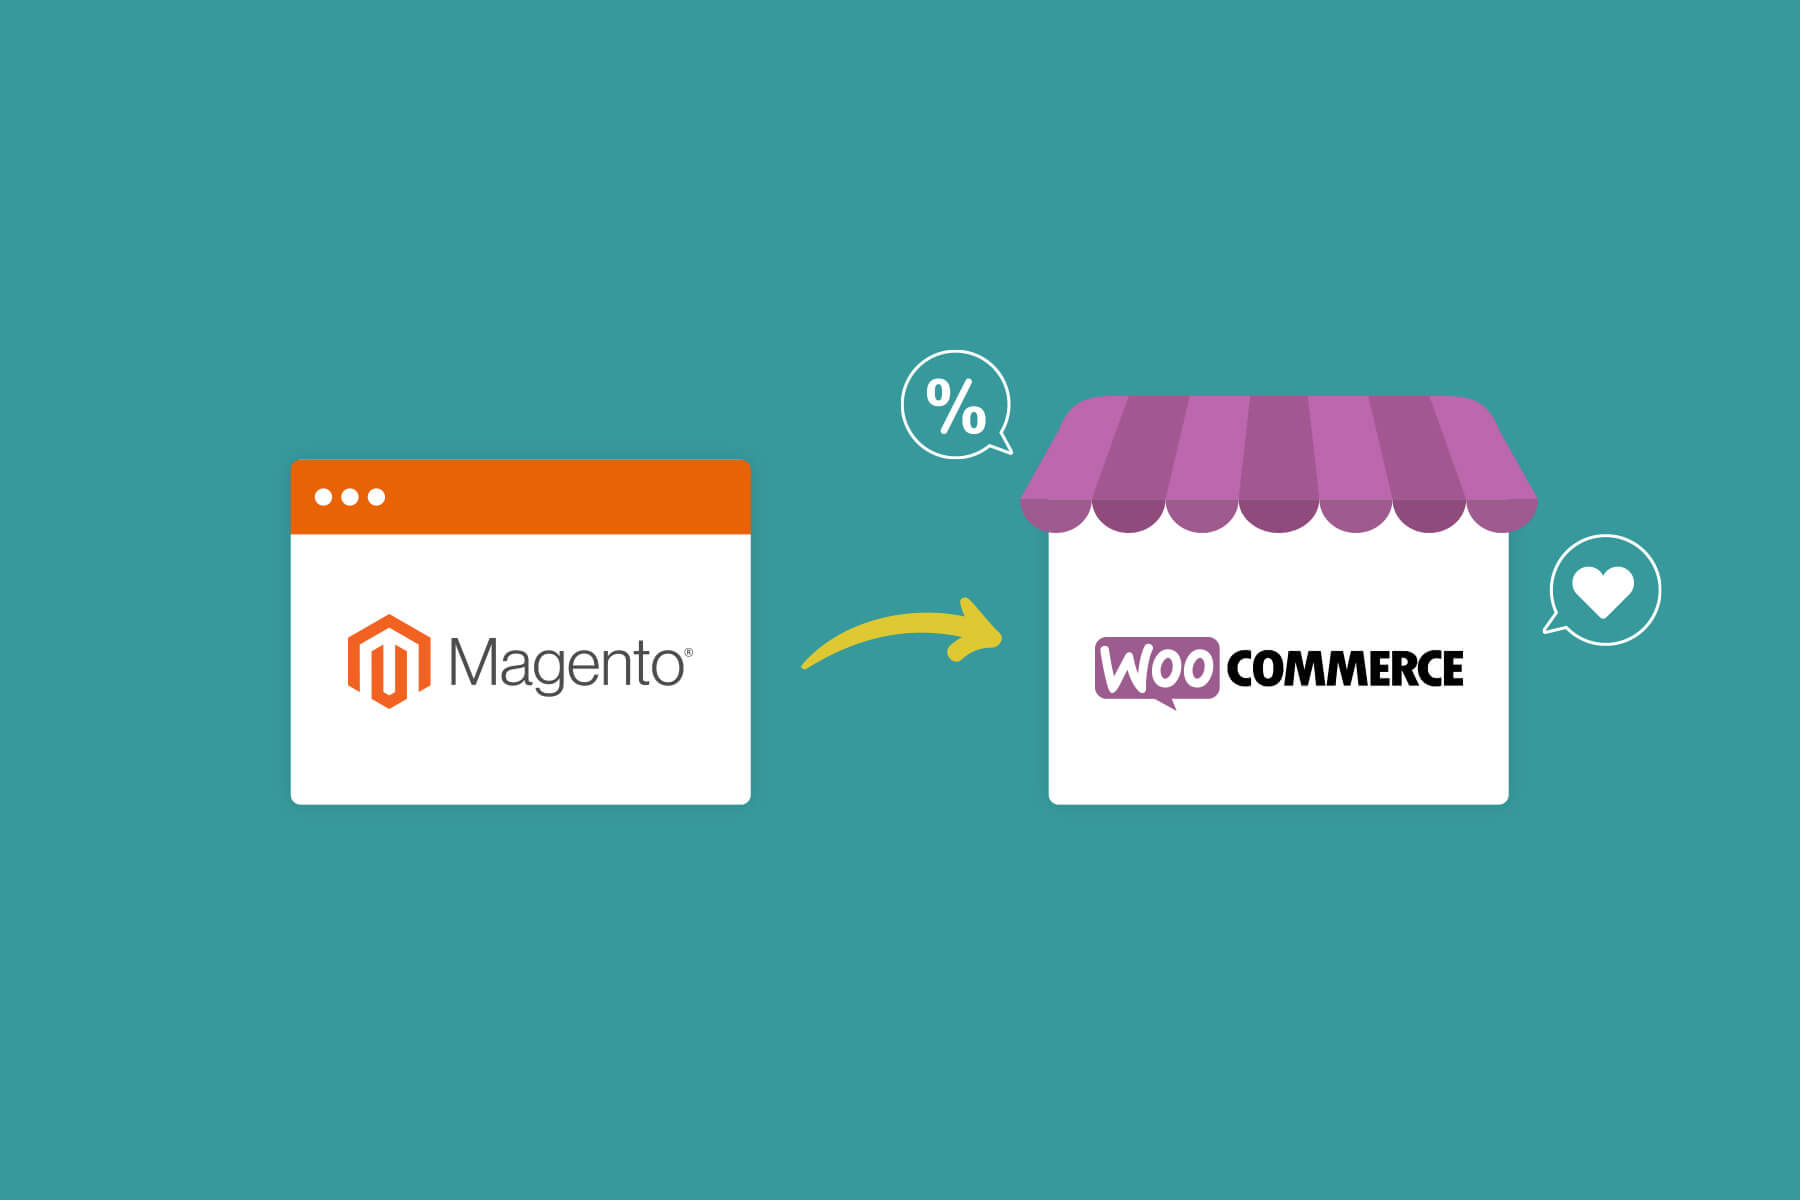 Do you need to evolve your current website from Magento 1?